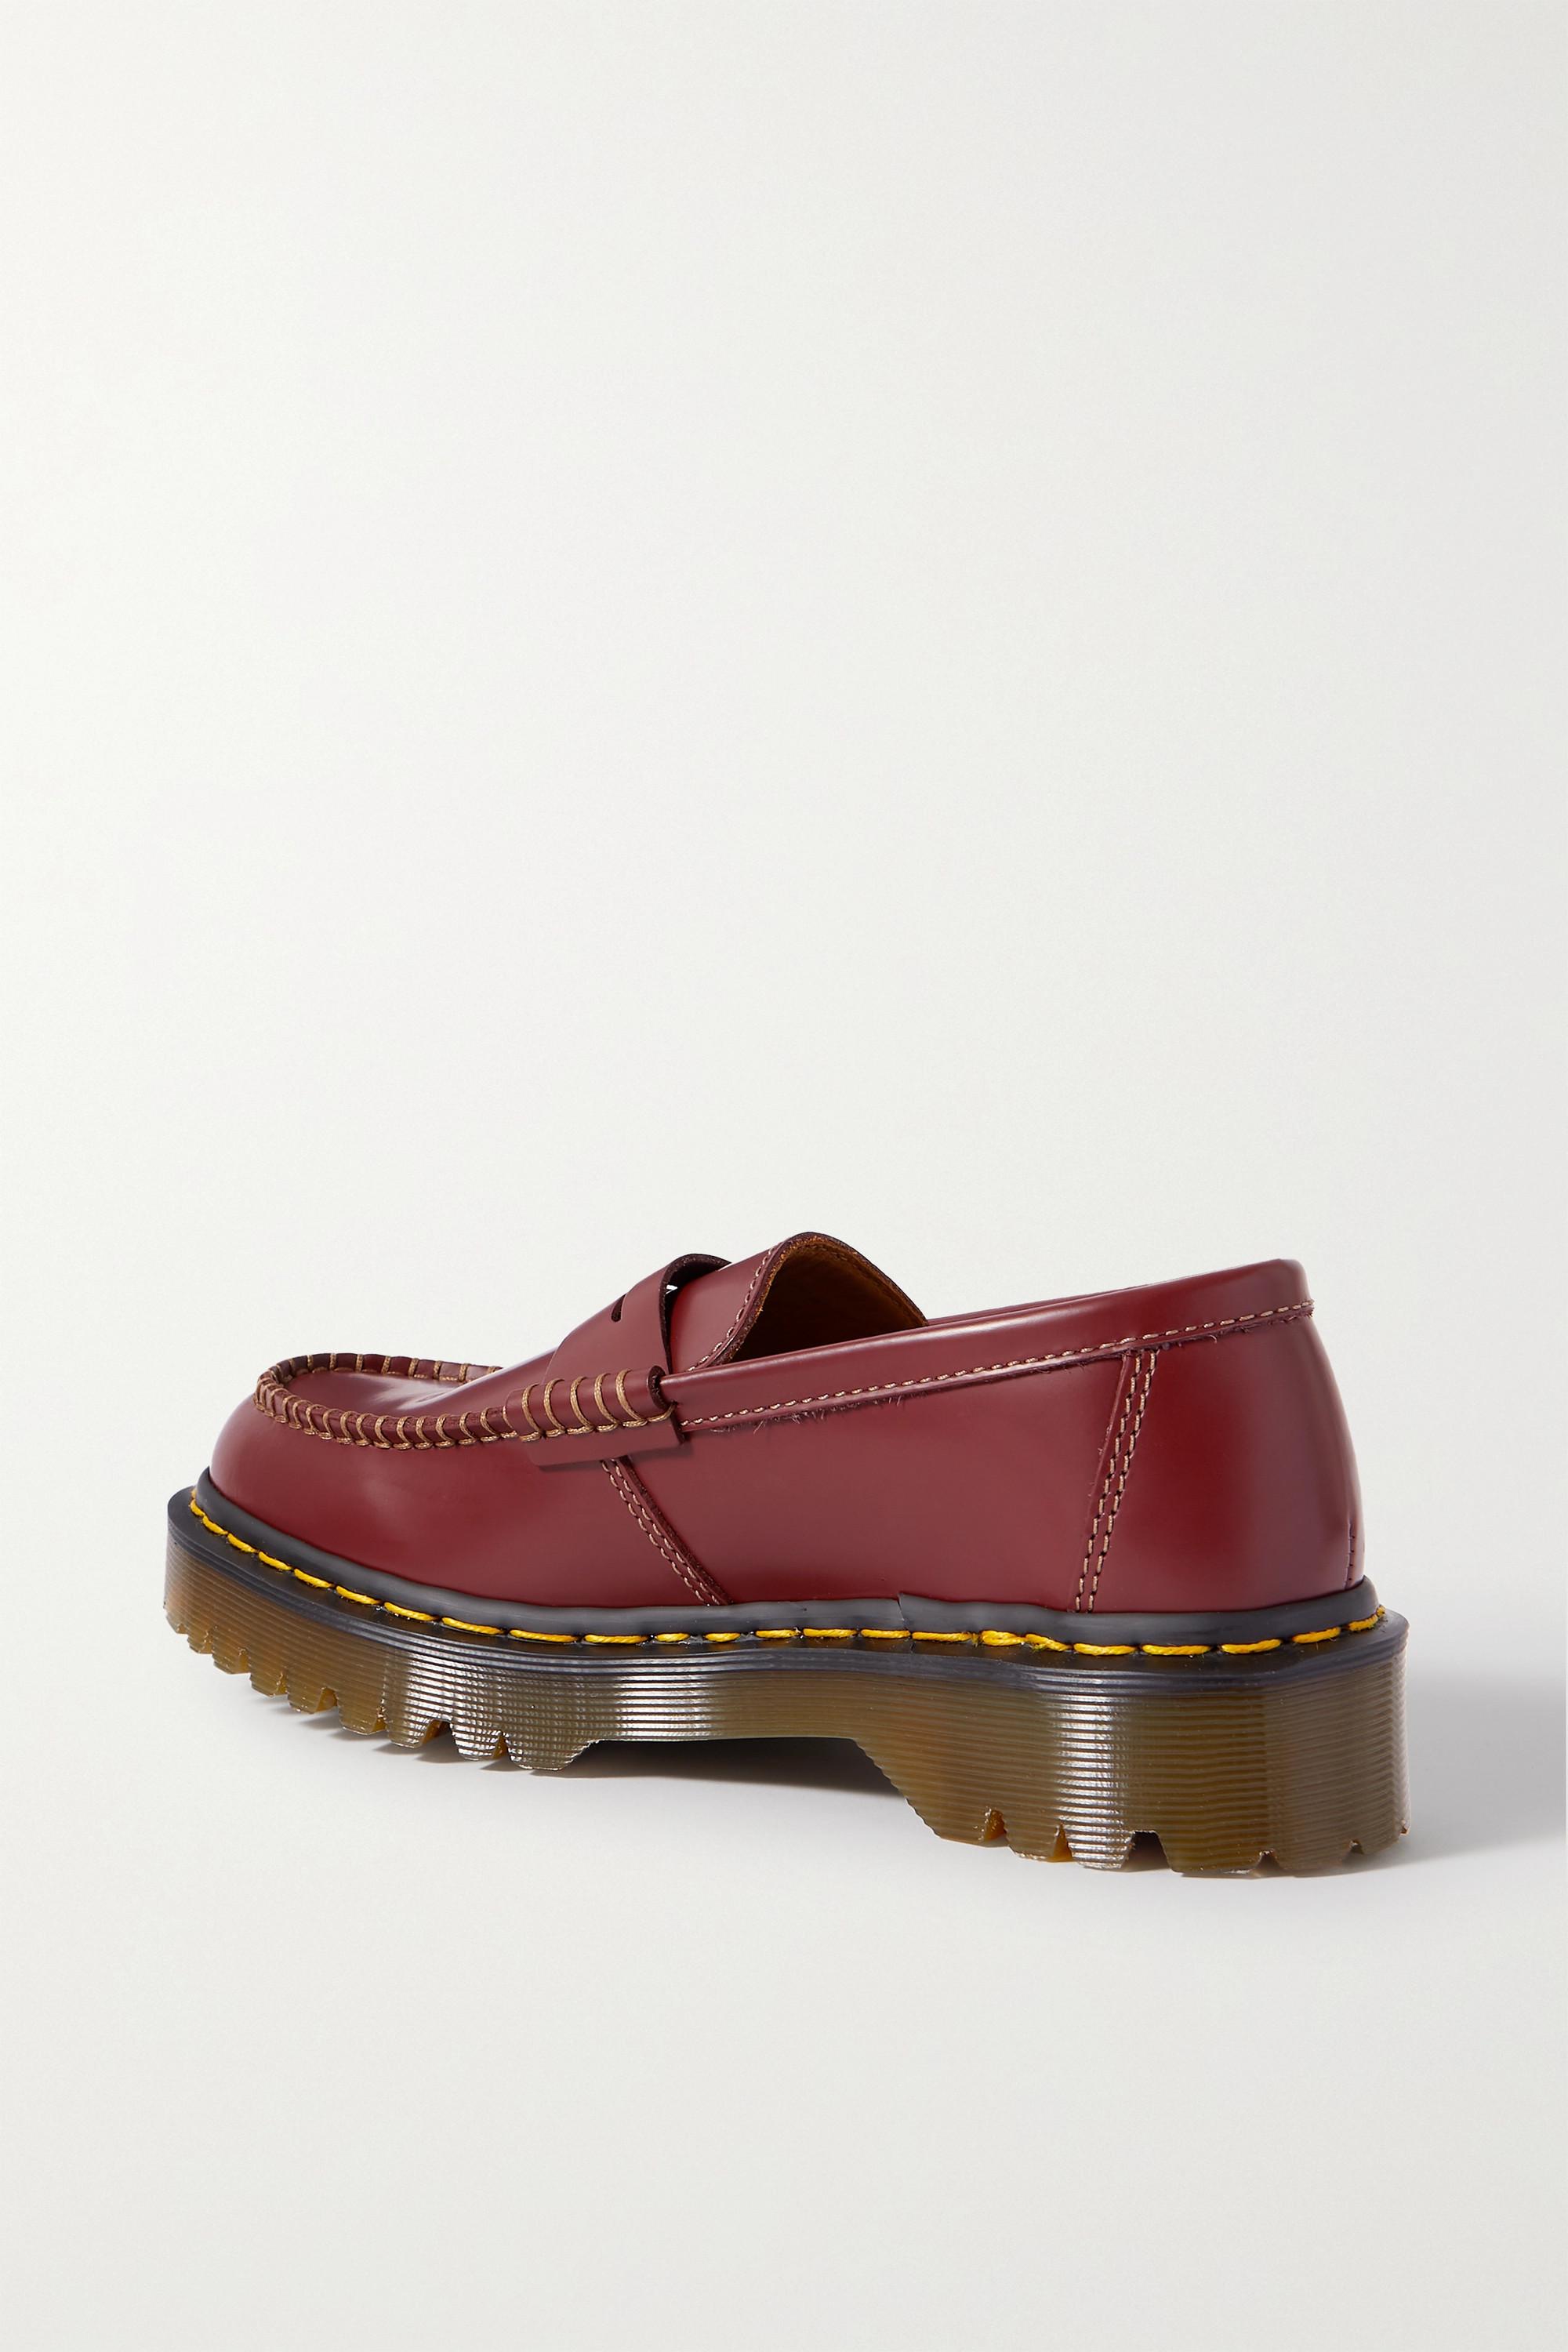 Comme des Garçons Dr. Martens Leather Loafers in Red | Lyst